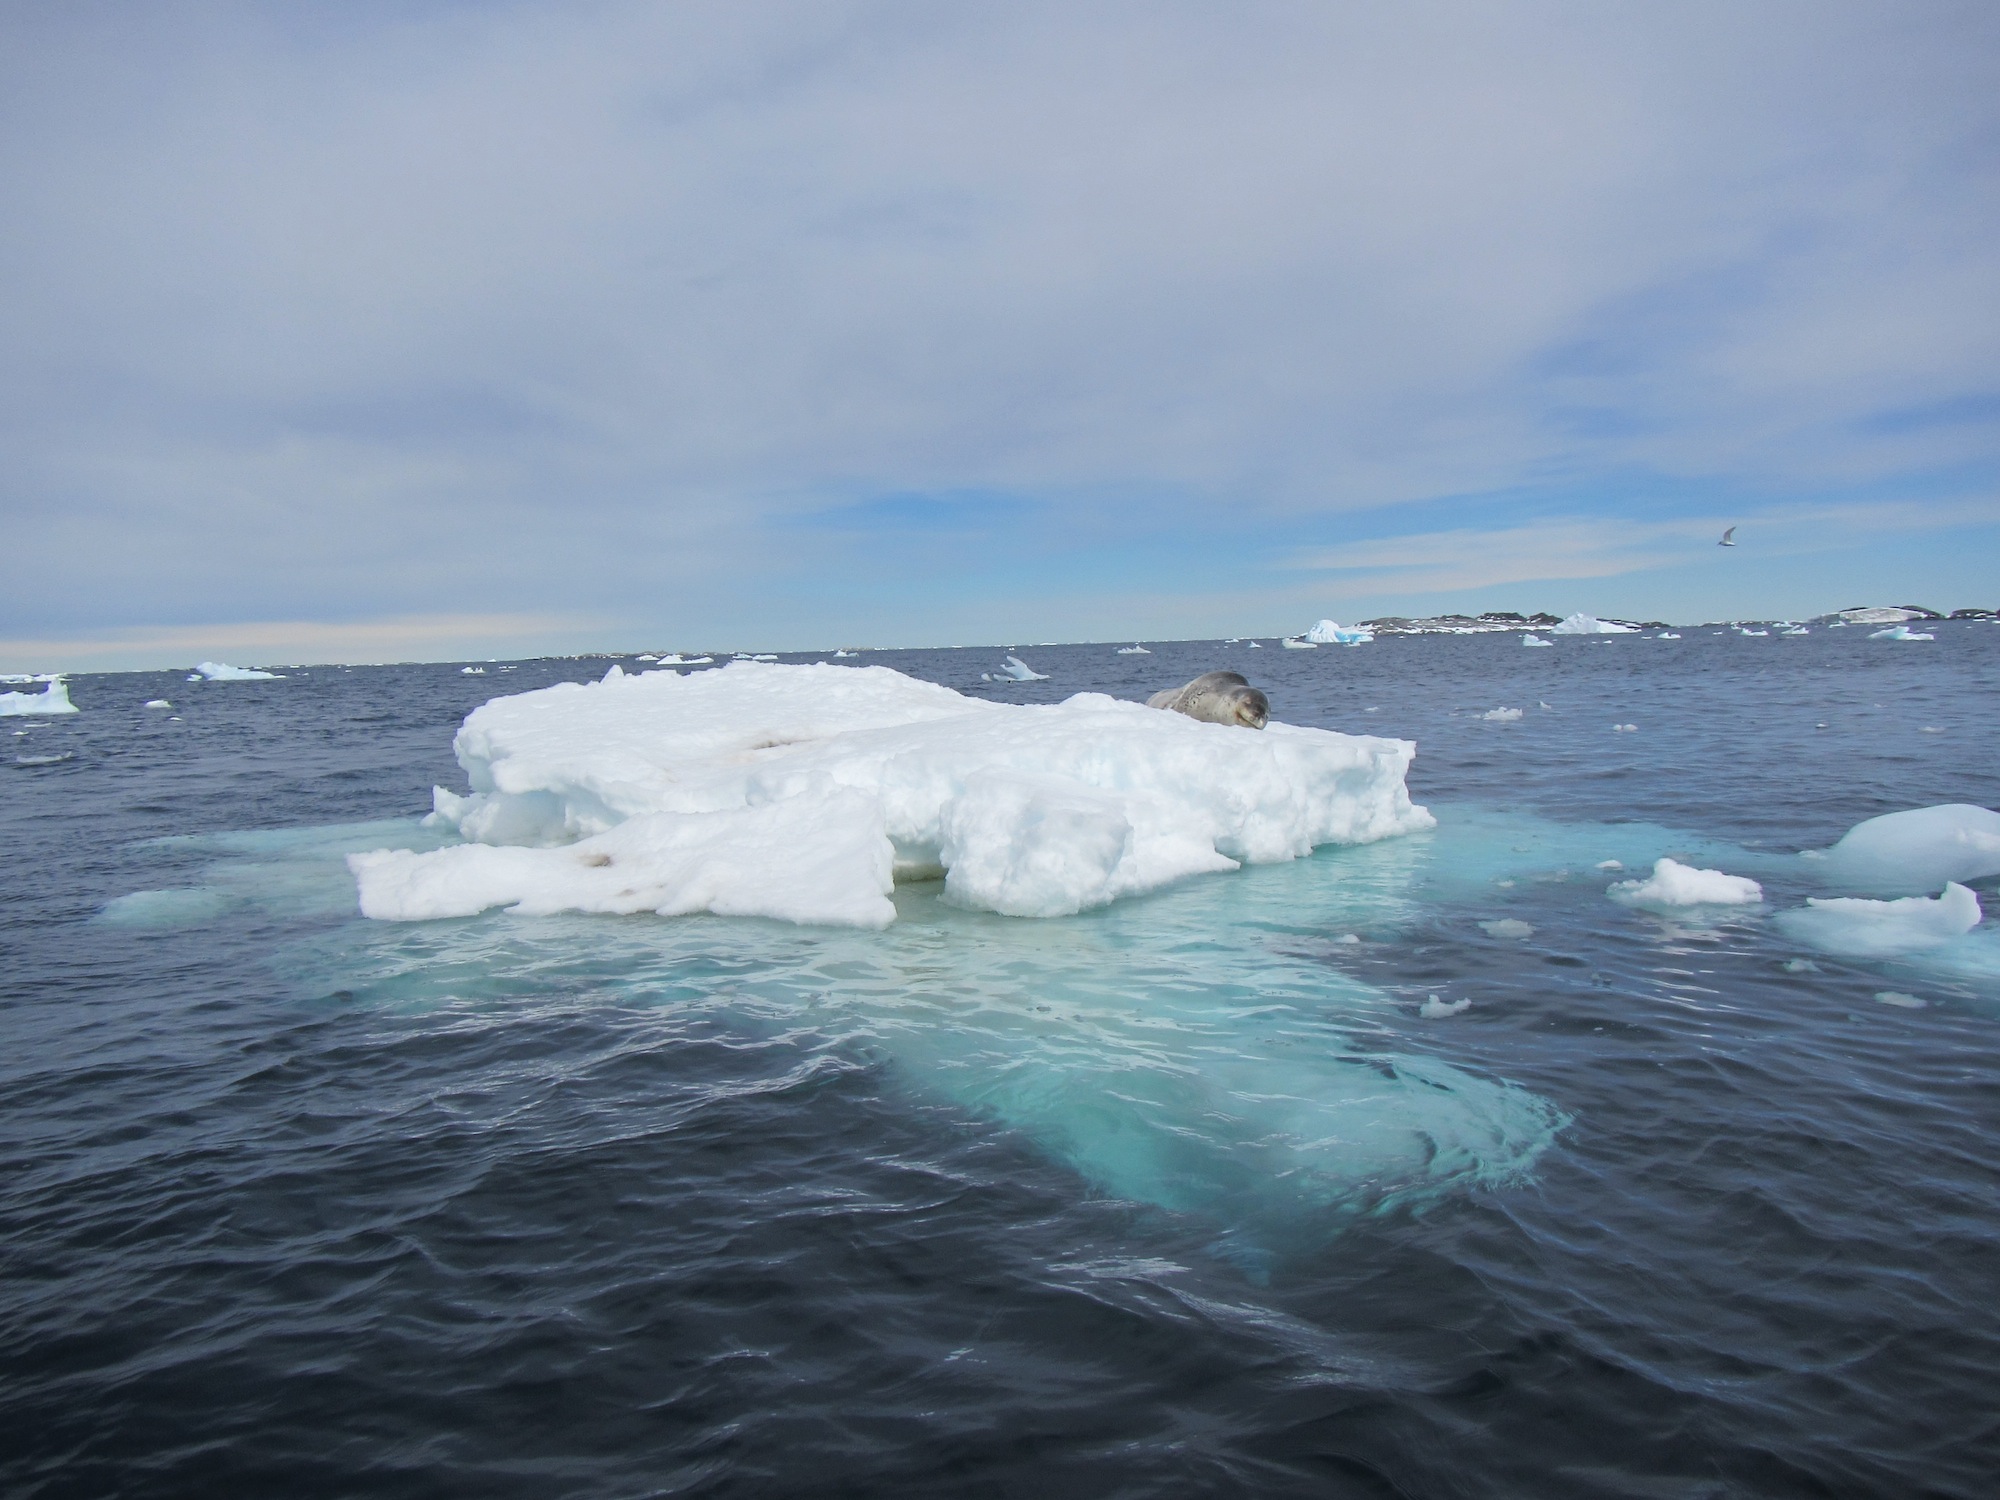 A leopard seal hauled out on an ice floe.